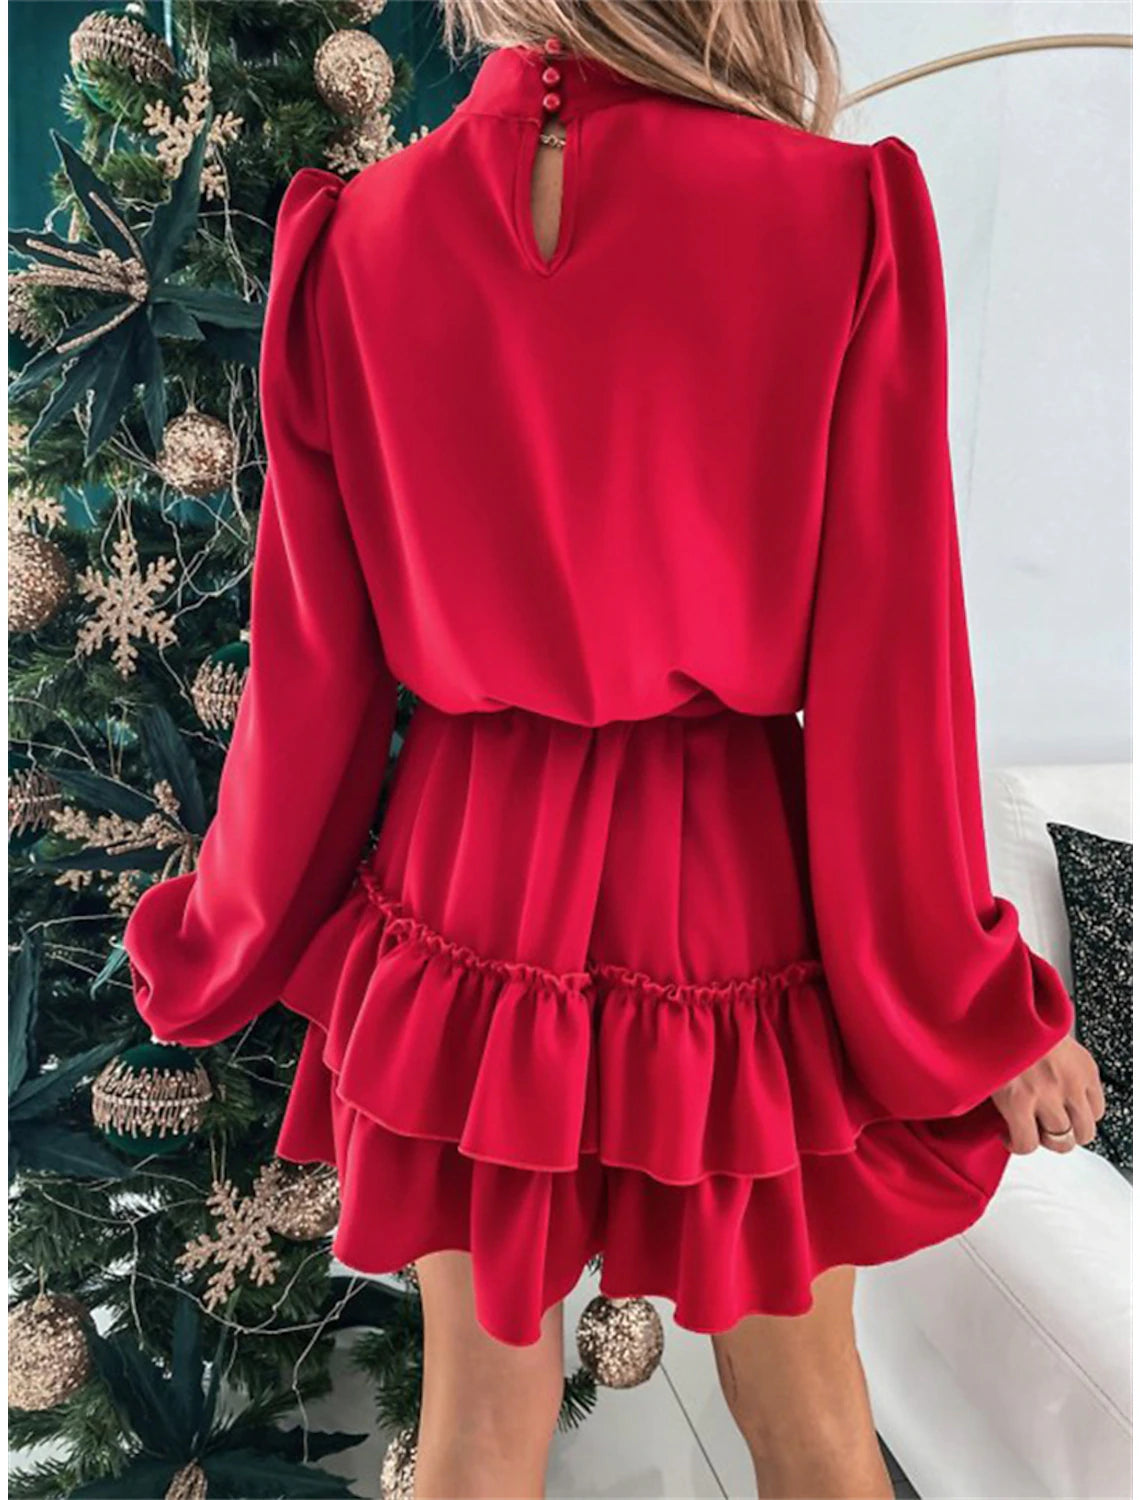 Women's Red Christmas Party Dress Homecoming Dress Cocktail Dress Black Red Green Long Sleeve Lace up Stand Collar Fashion Winter Dress